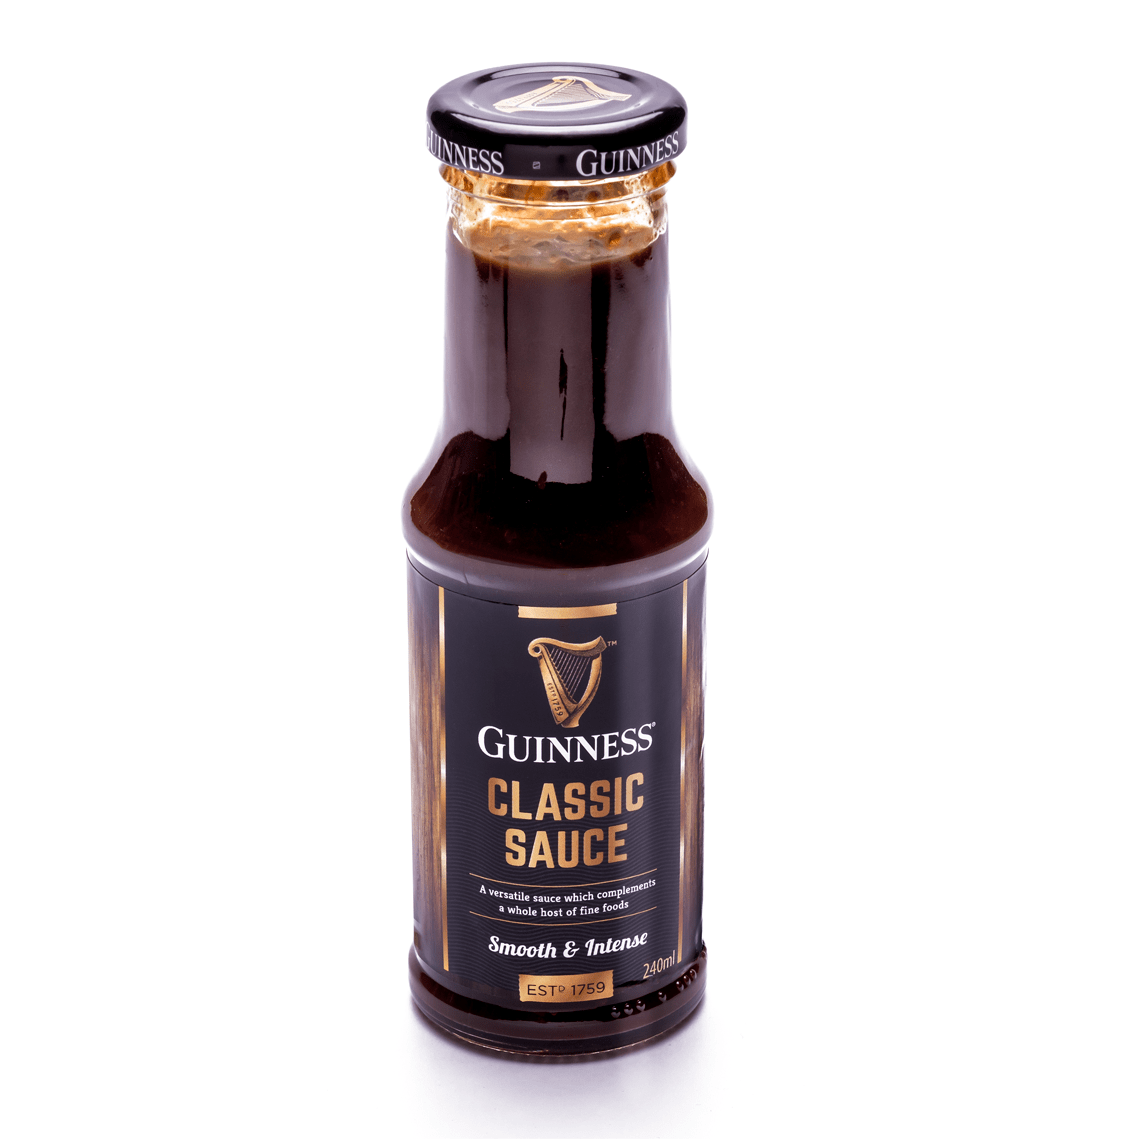 Guinness Kitchen Gift Box classic sauce served on a white background.